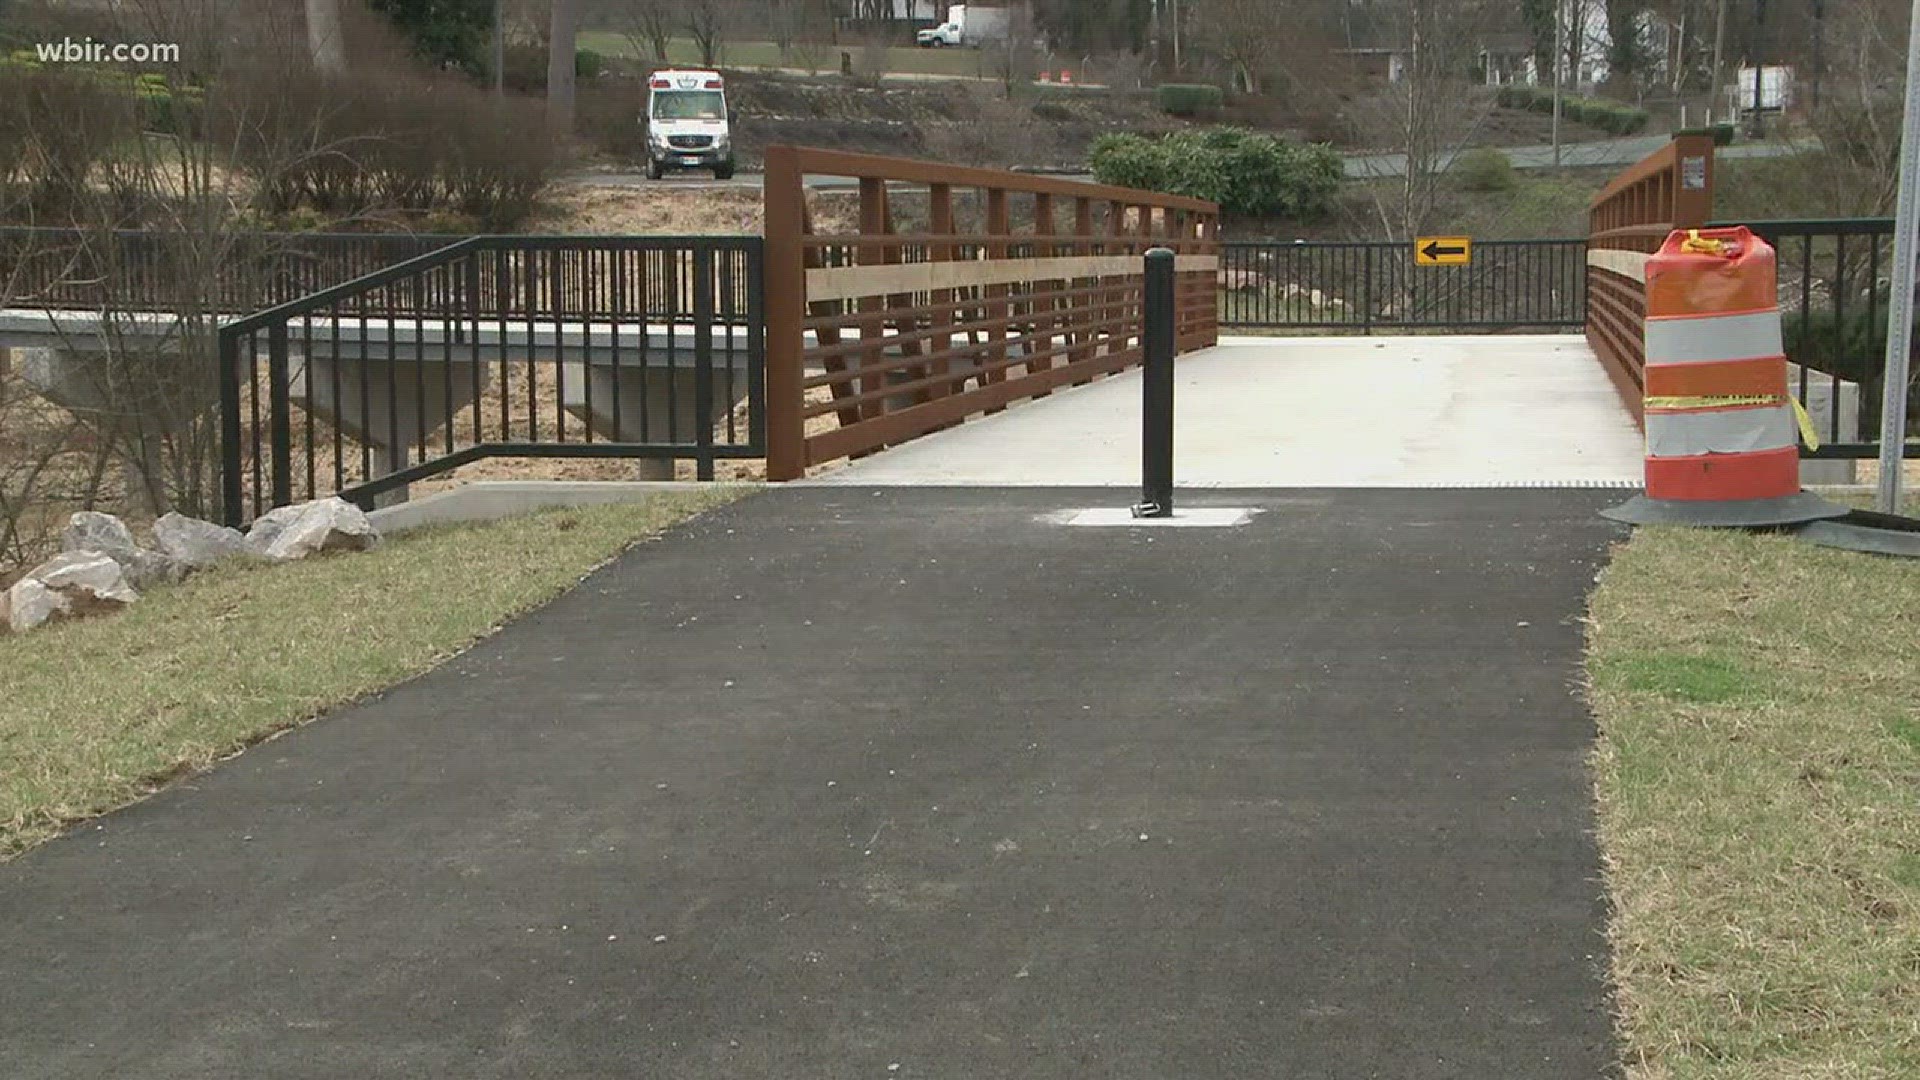 Feb. 19, 2018: Crews are putting the final touches on a new segment of the First Creek Greenway in North Knoxville.